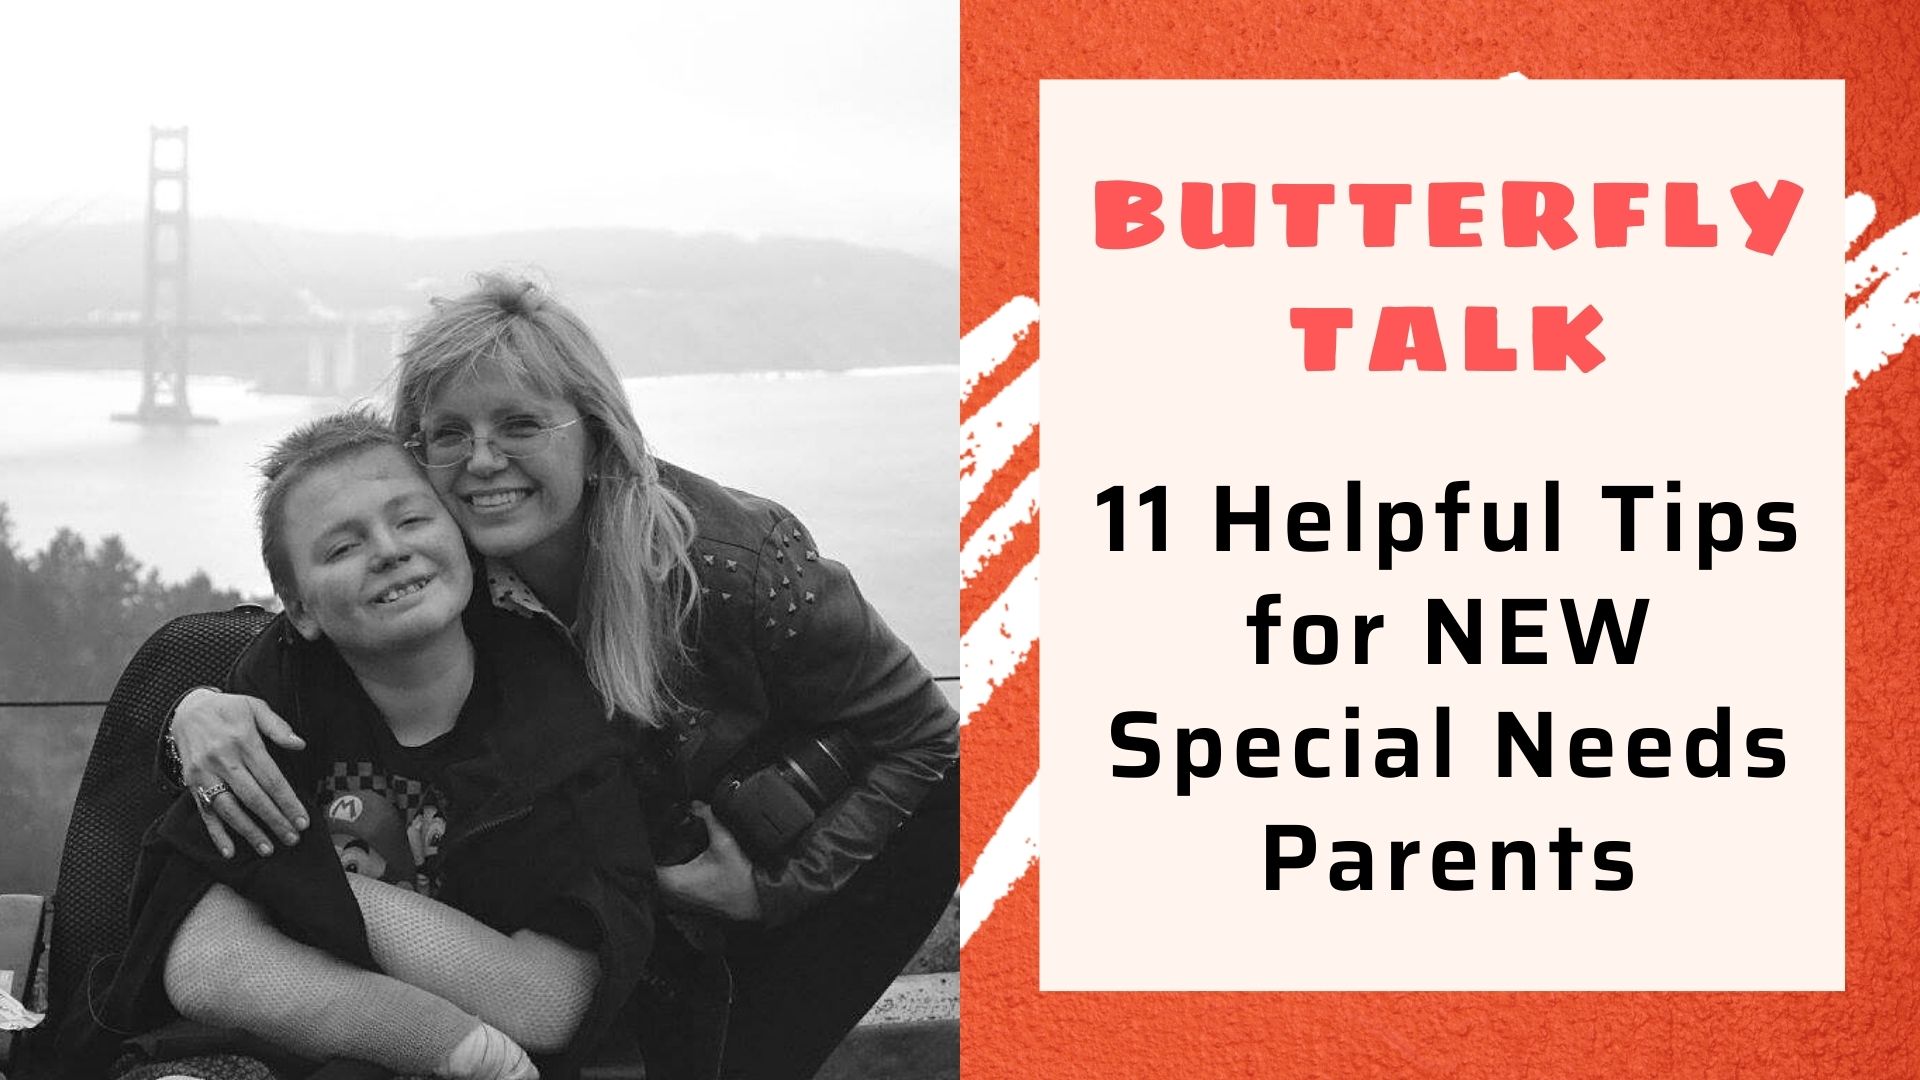 Butterfly Talk Episode 10 - 11 Helpful Tips for NEW Special Needs Parents